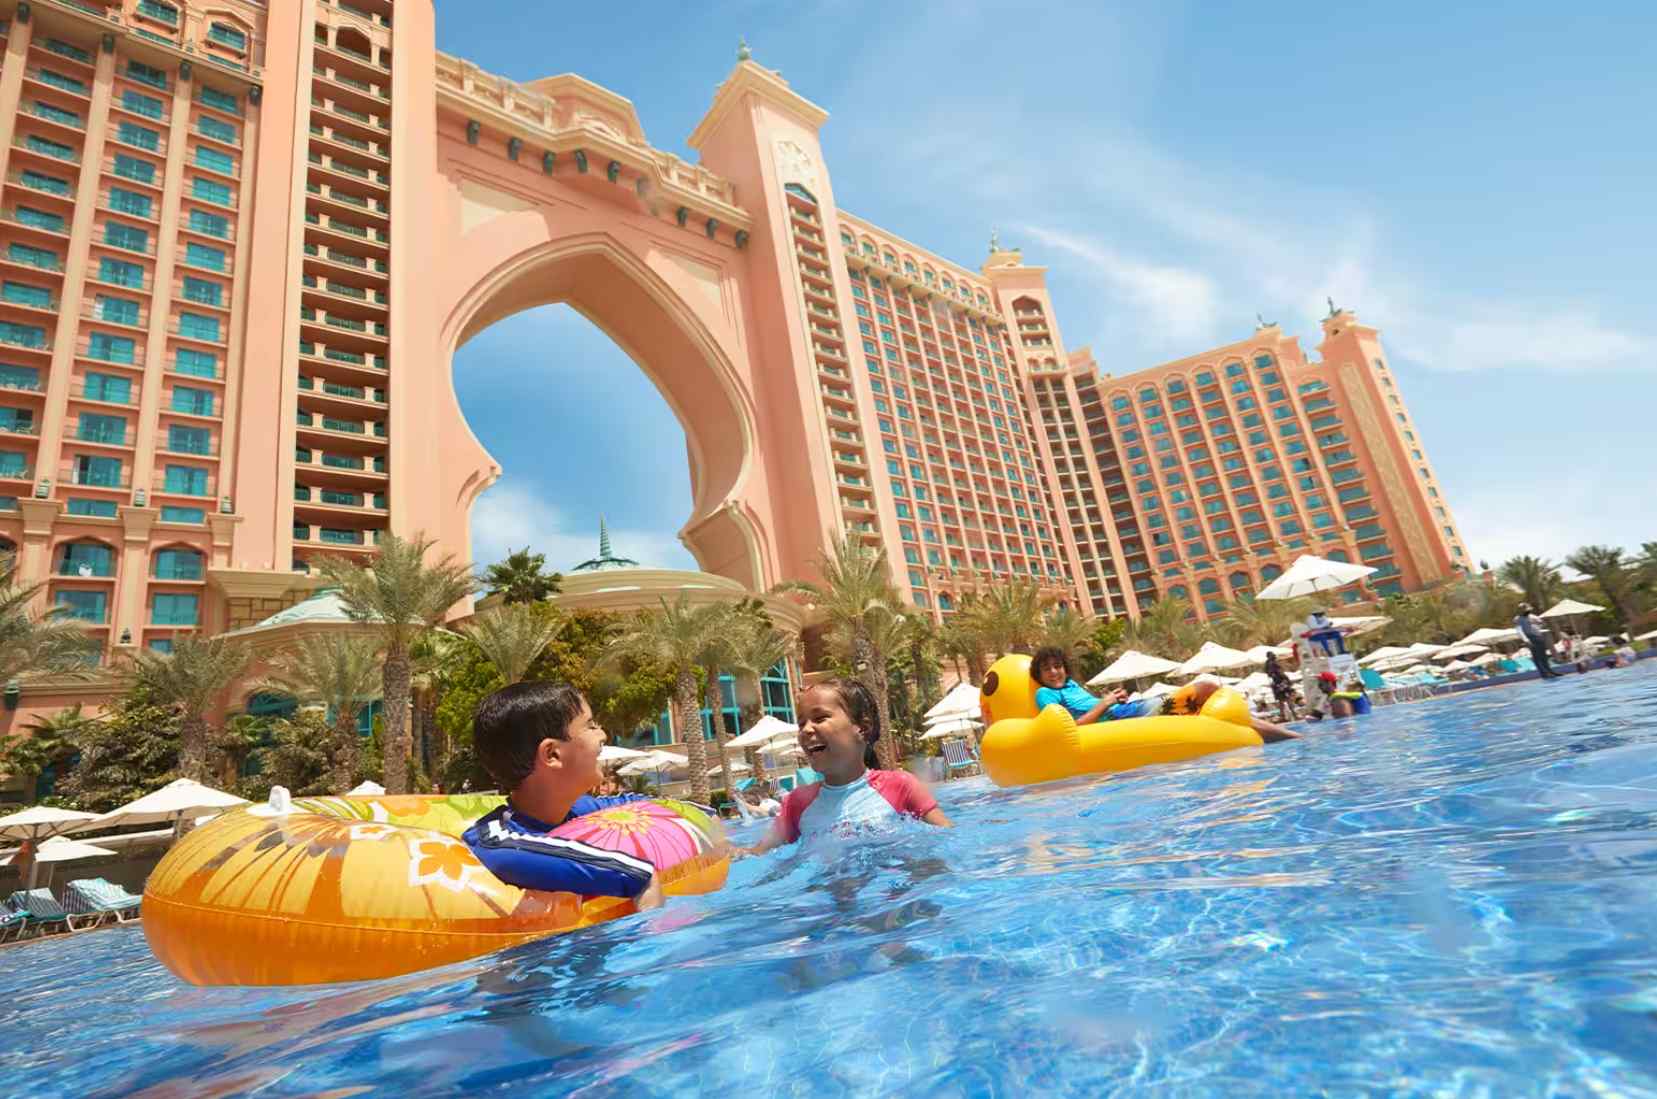 To satisfy your craving for thrills and adventure, Wild Wadi Waterpark in Dubai is the perfect destination, especially for families.